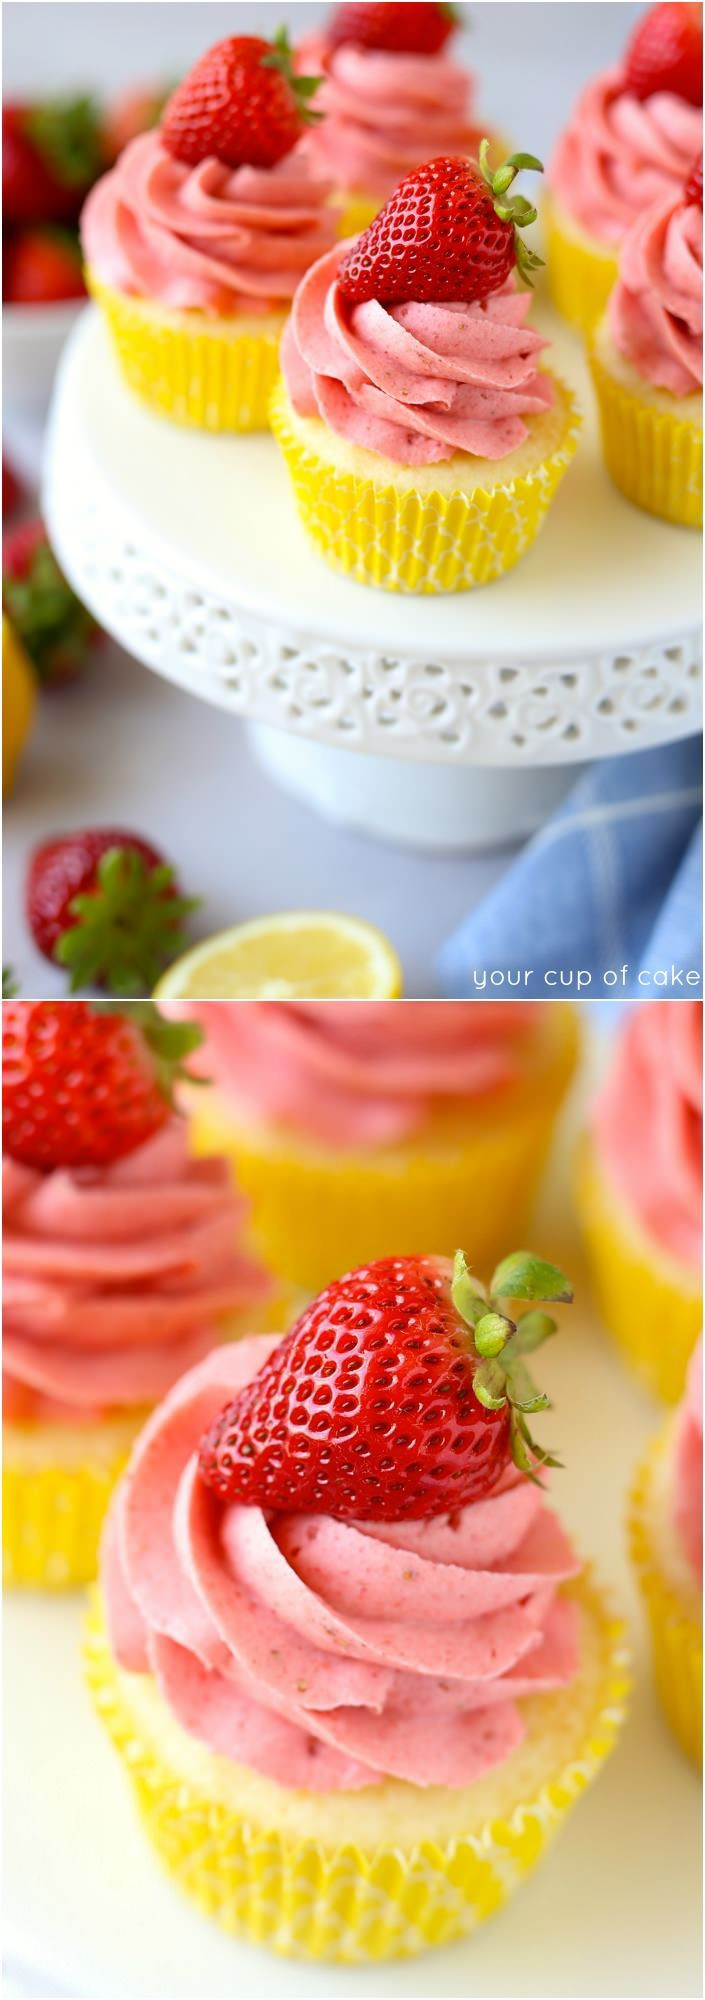 Summer Cupcakes Flavors
 17 Best ideas about Summer Cupcake Flavors on Pinterest